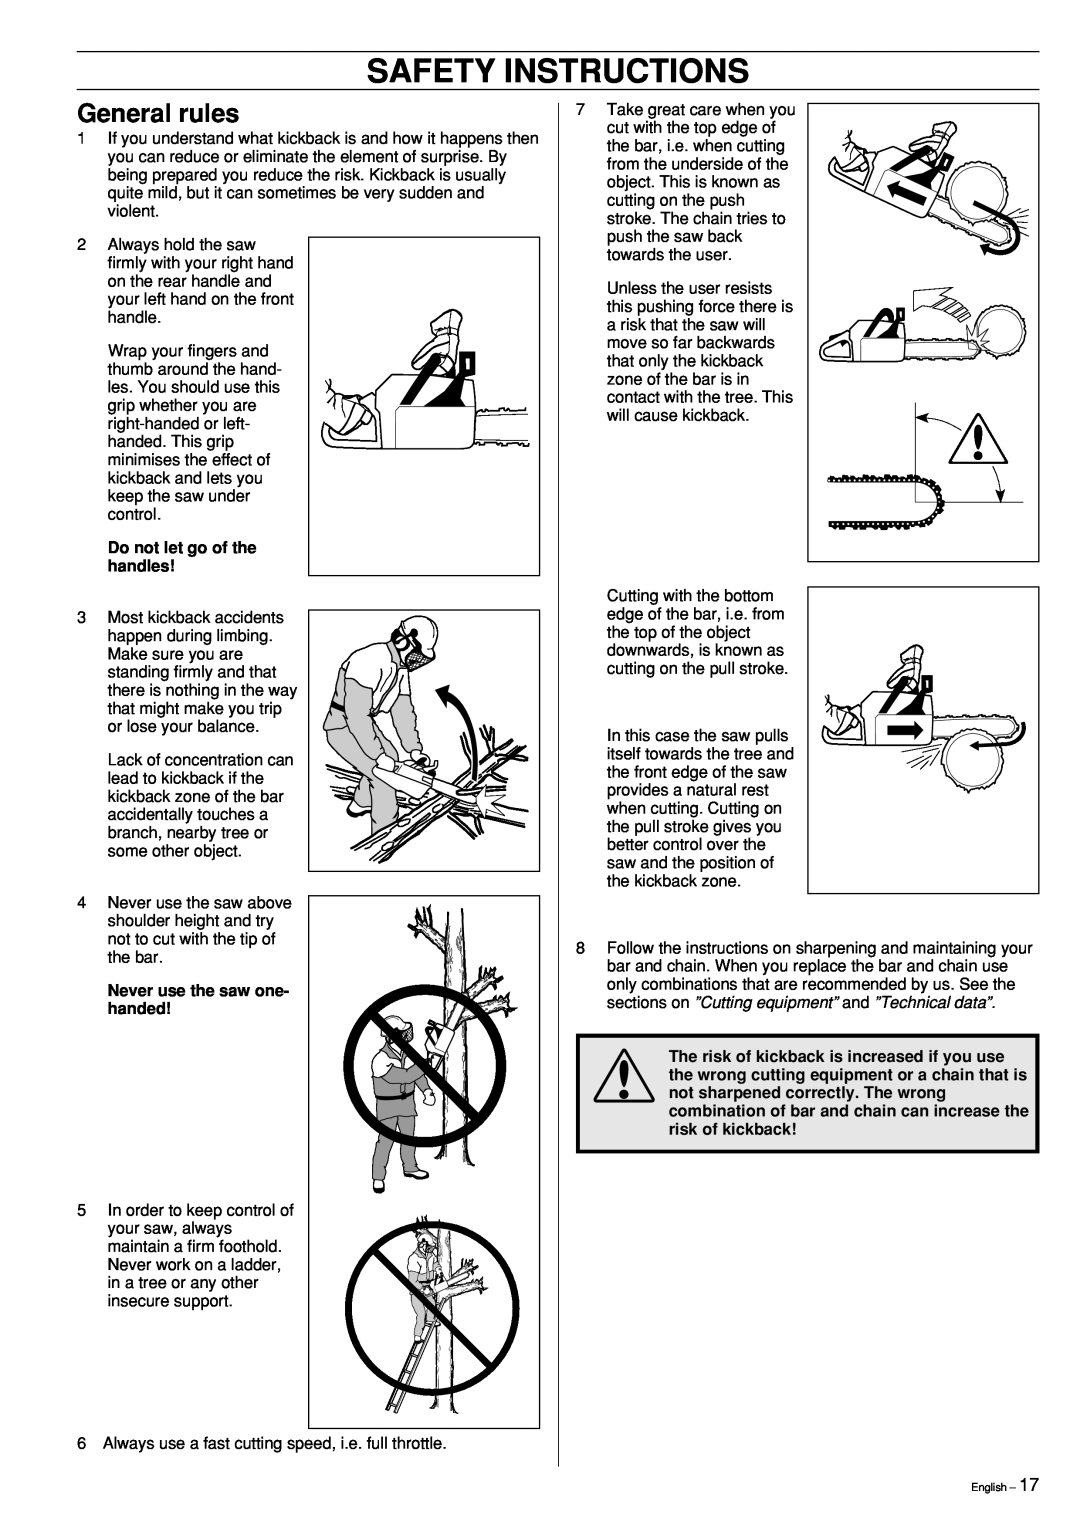 Jonsered CS 2186 manual General rules, Do not let go of the handles, Never use the saw one- handed, Safety Instructions 